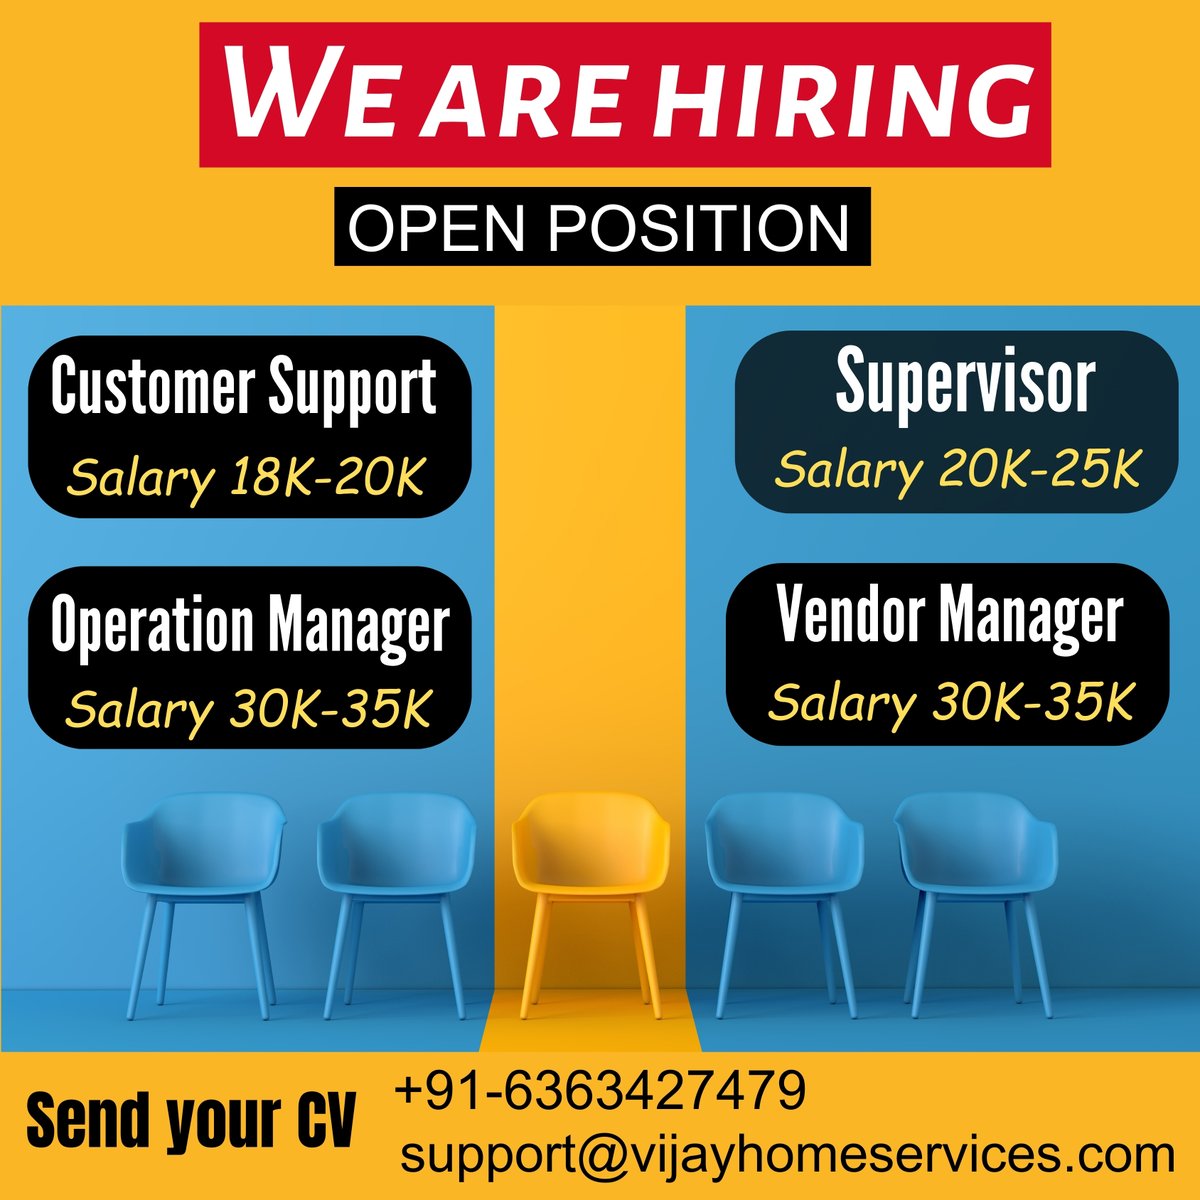 Exciting new career opportunities await! We are hiring for Various Roles. Send your CV to support@vijayhomeservices.com or call +91-6363427479 to kickstart your journey with us. 
#hiring #careers #jobopportunities #customerservice #operations #vendormanagement